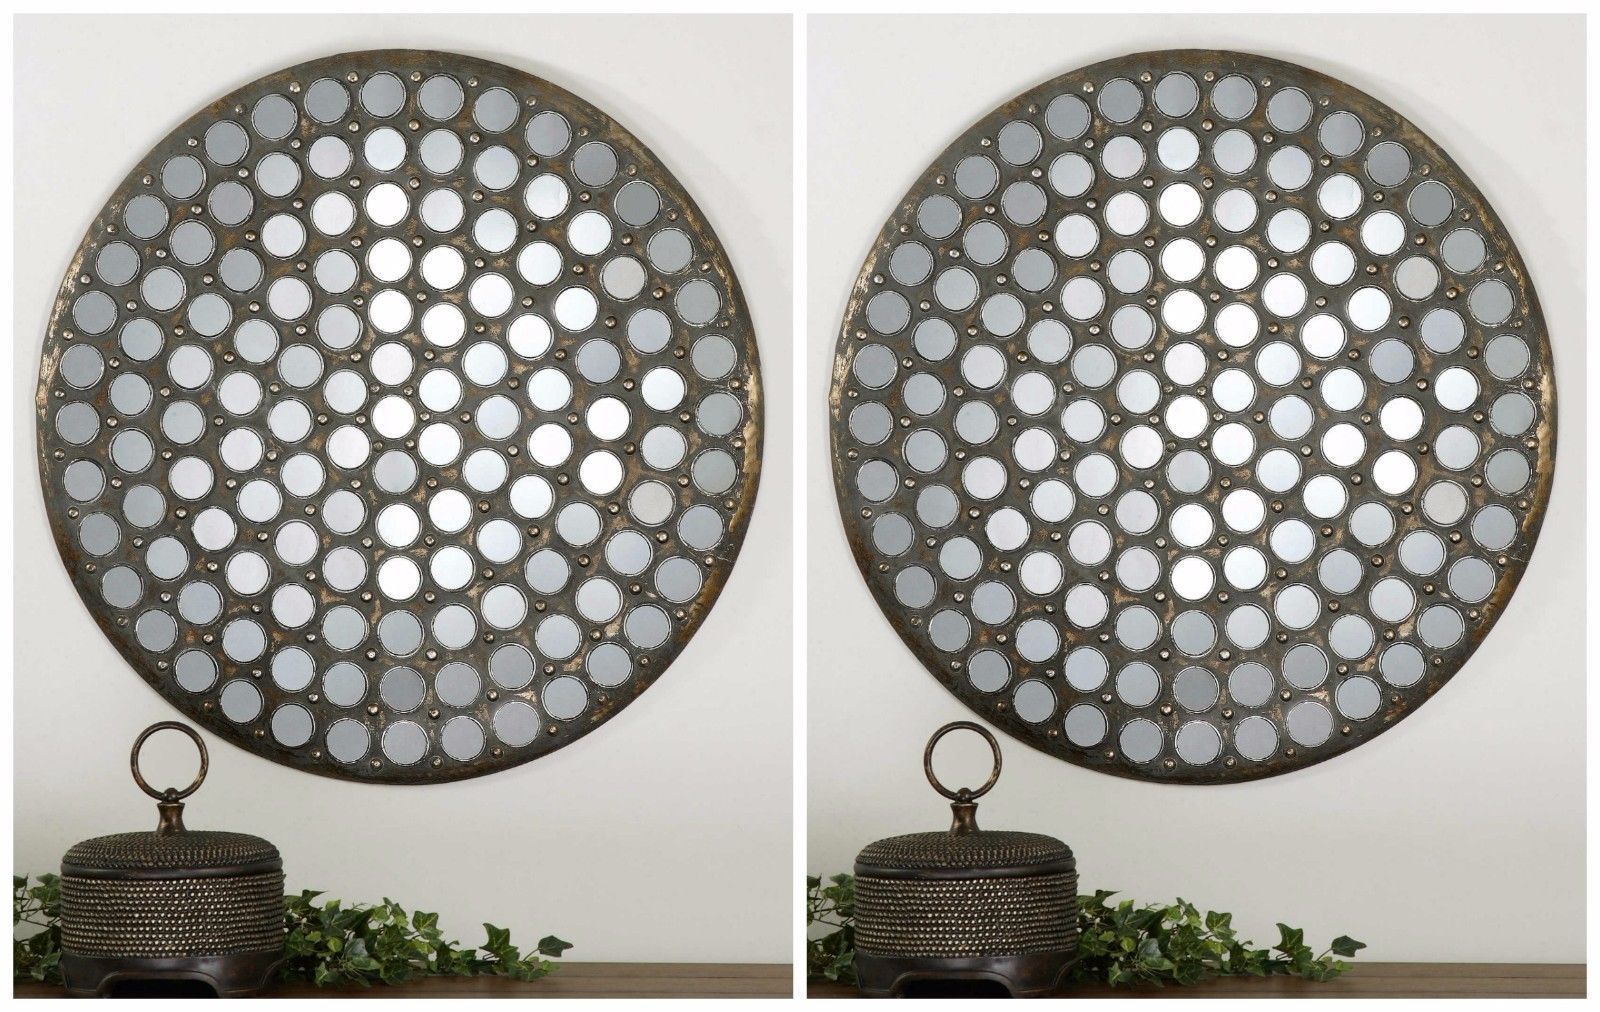 Two Rich Small Round Mirrors Set In Aged Metal Finish Frame Wall Art Inside Small Metal Wall Art (View 15 of 15)